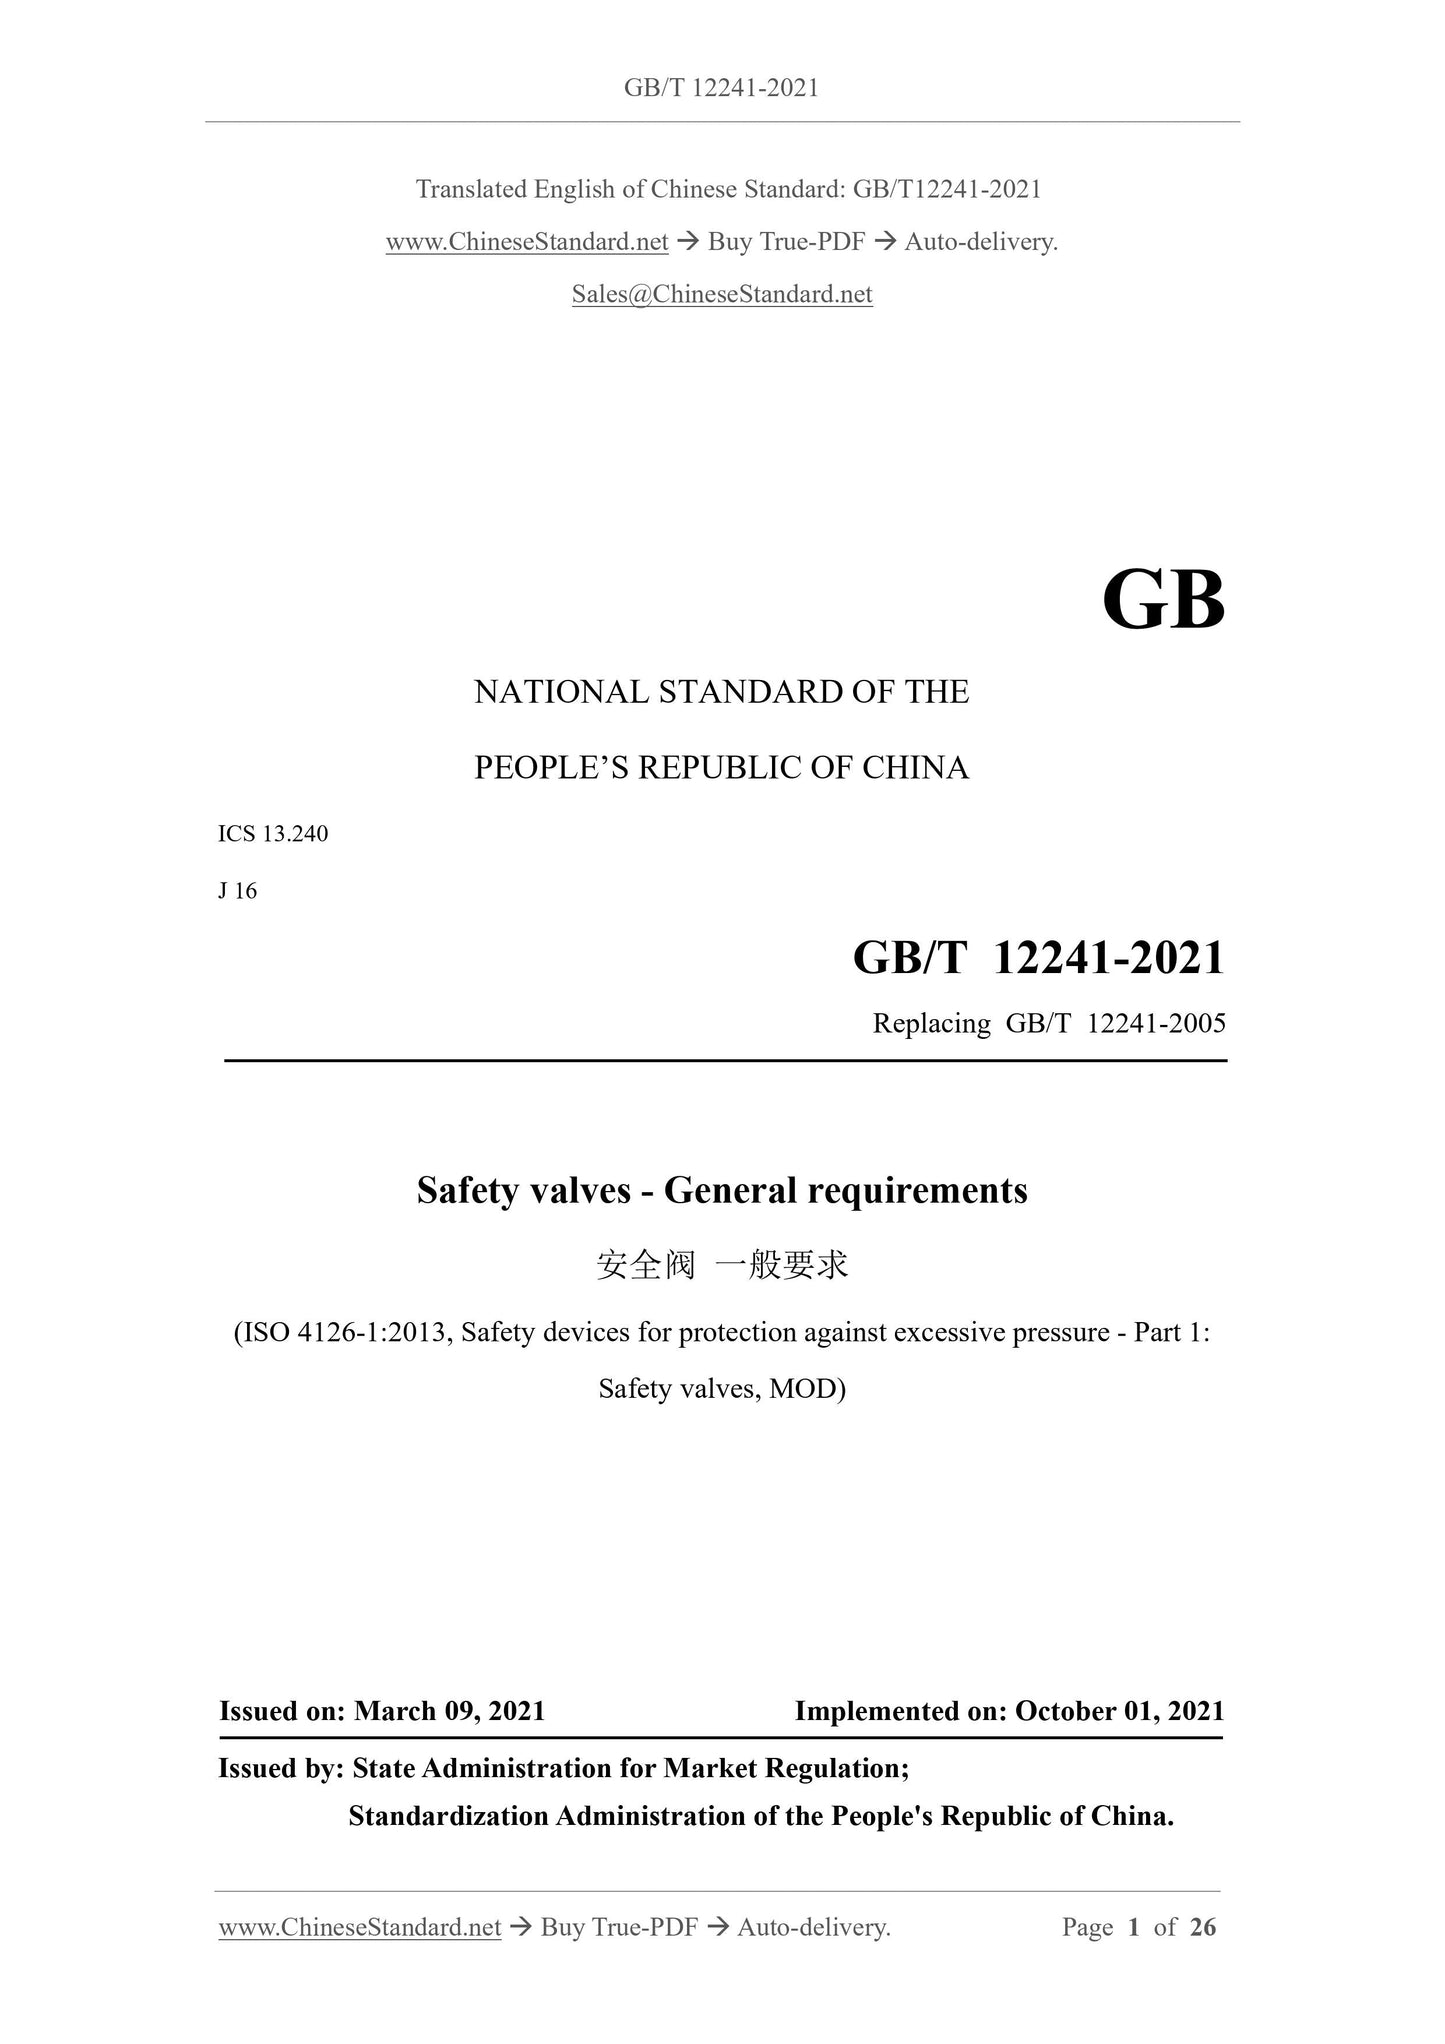 GB/T 12241-2021 Page 1